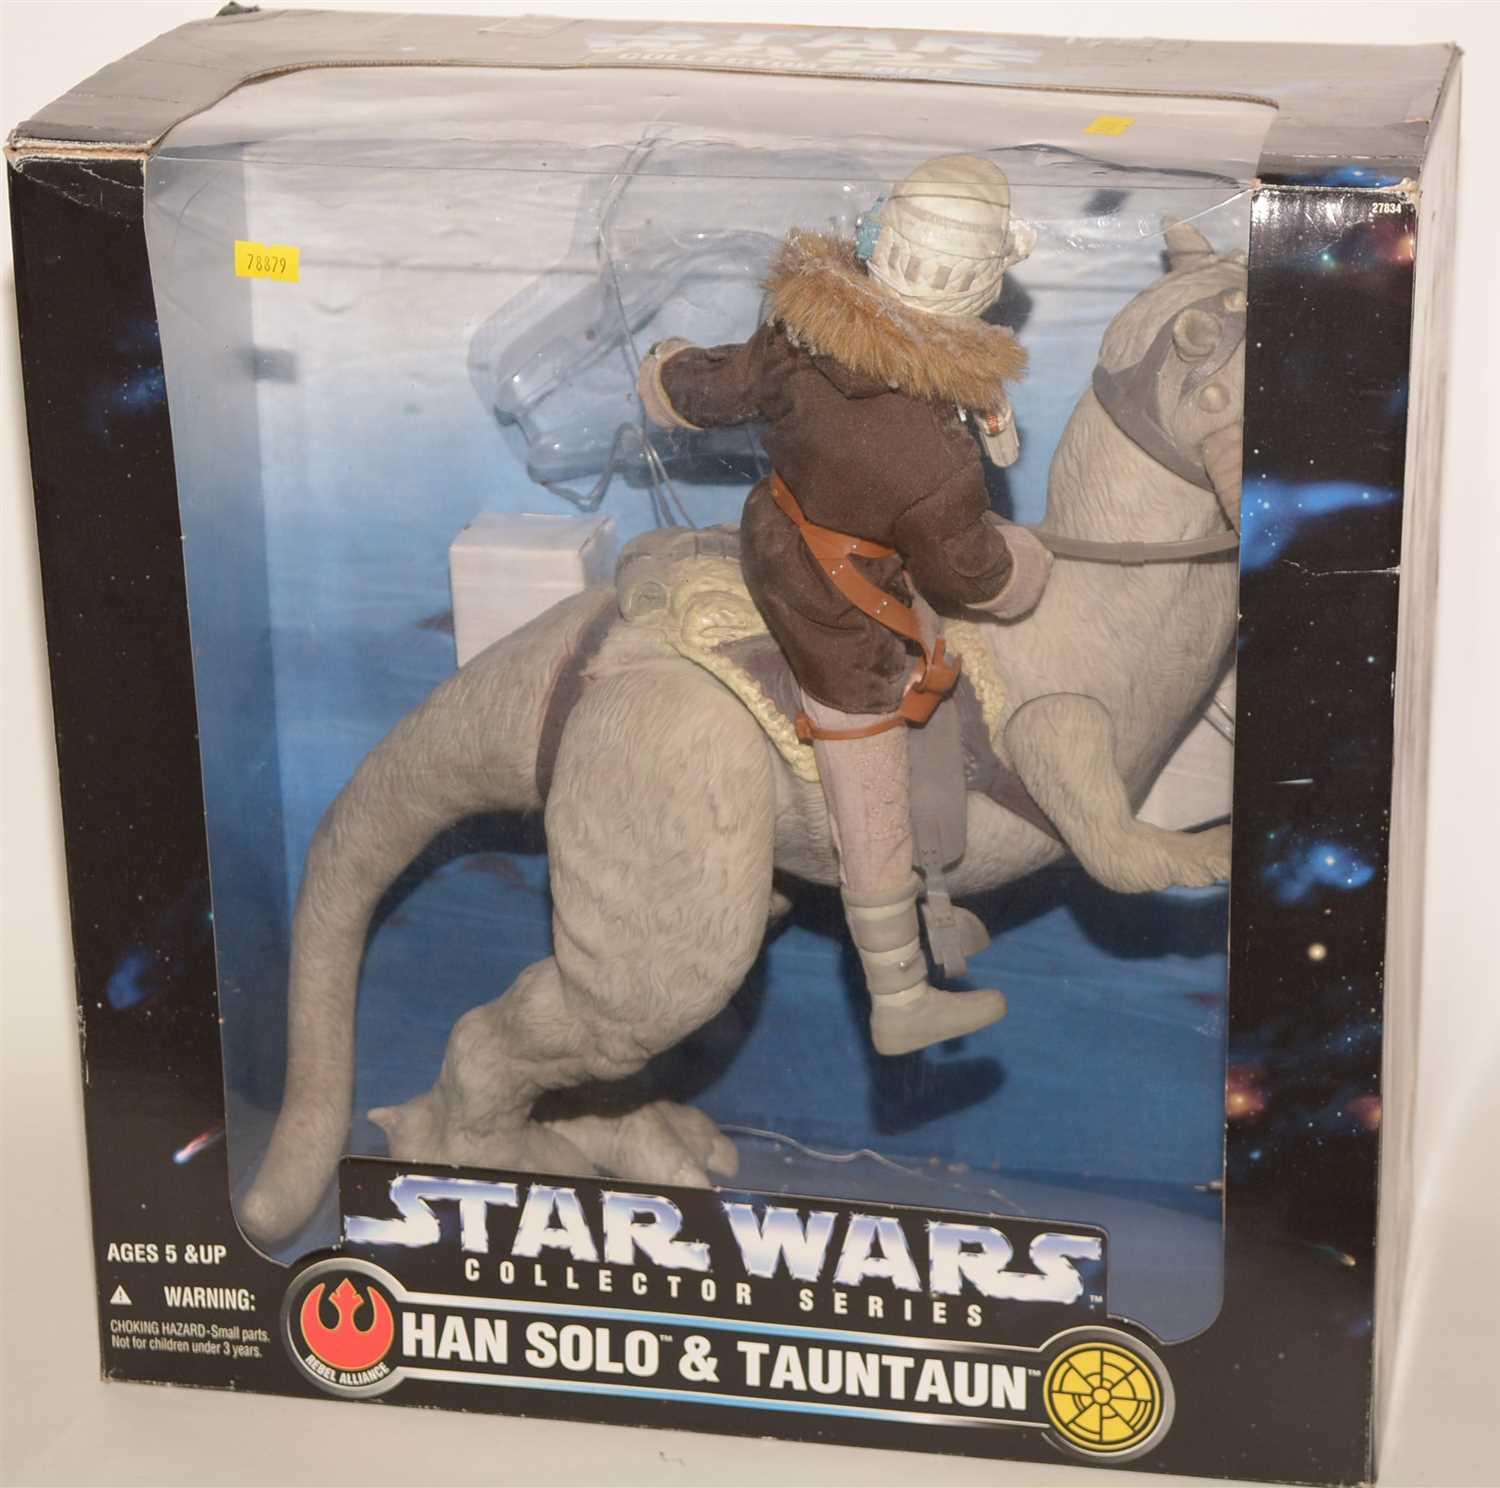 Lot 1240 - Star Wars "Collector" series large-scale Hans Solo and Tauntaun.